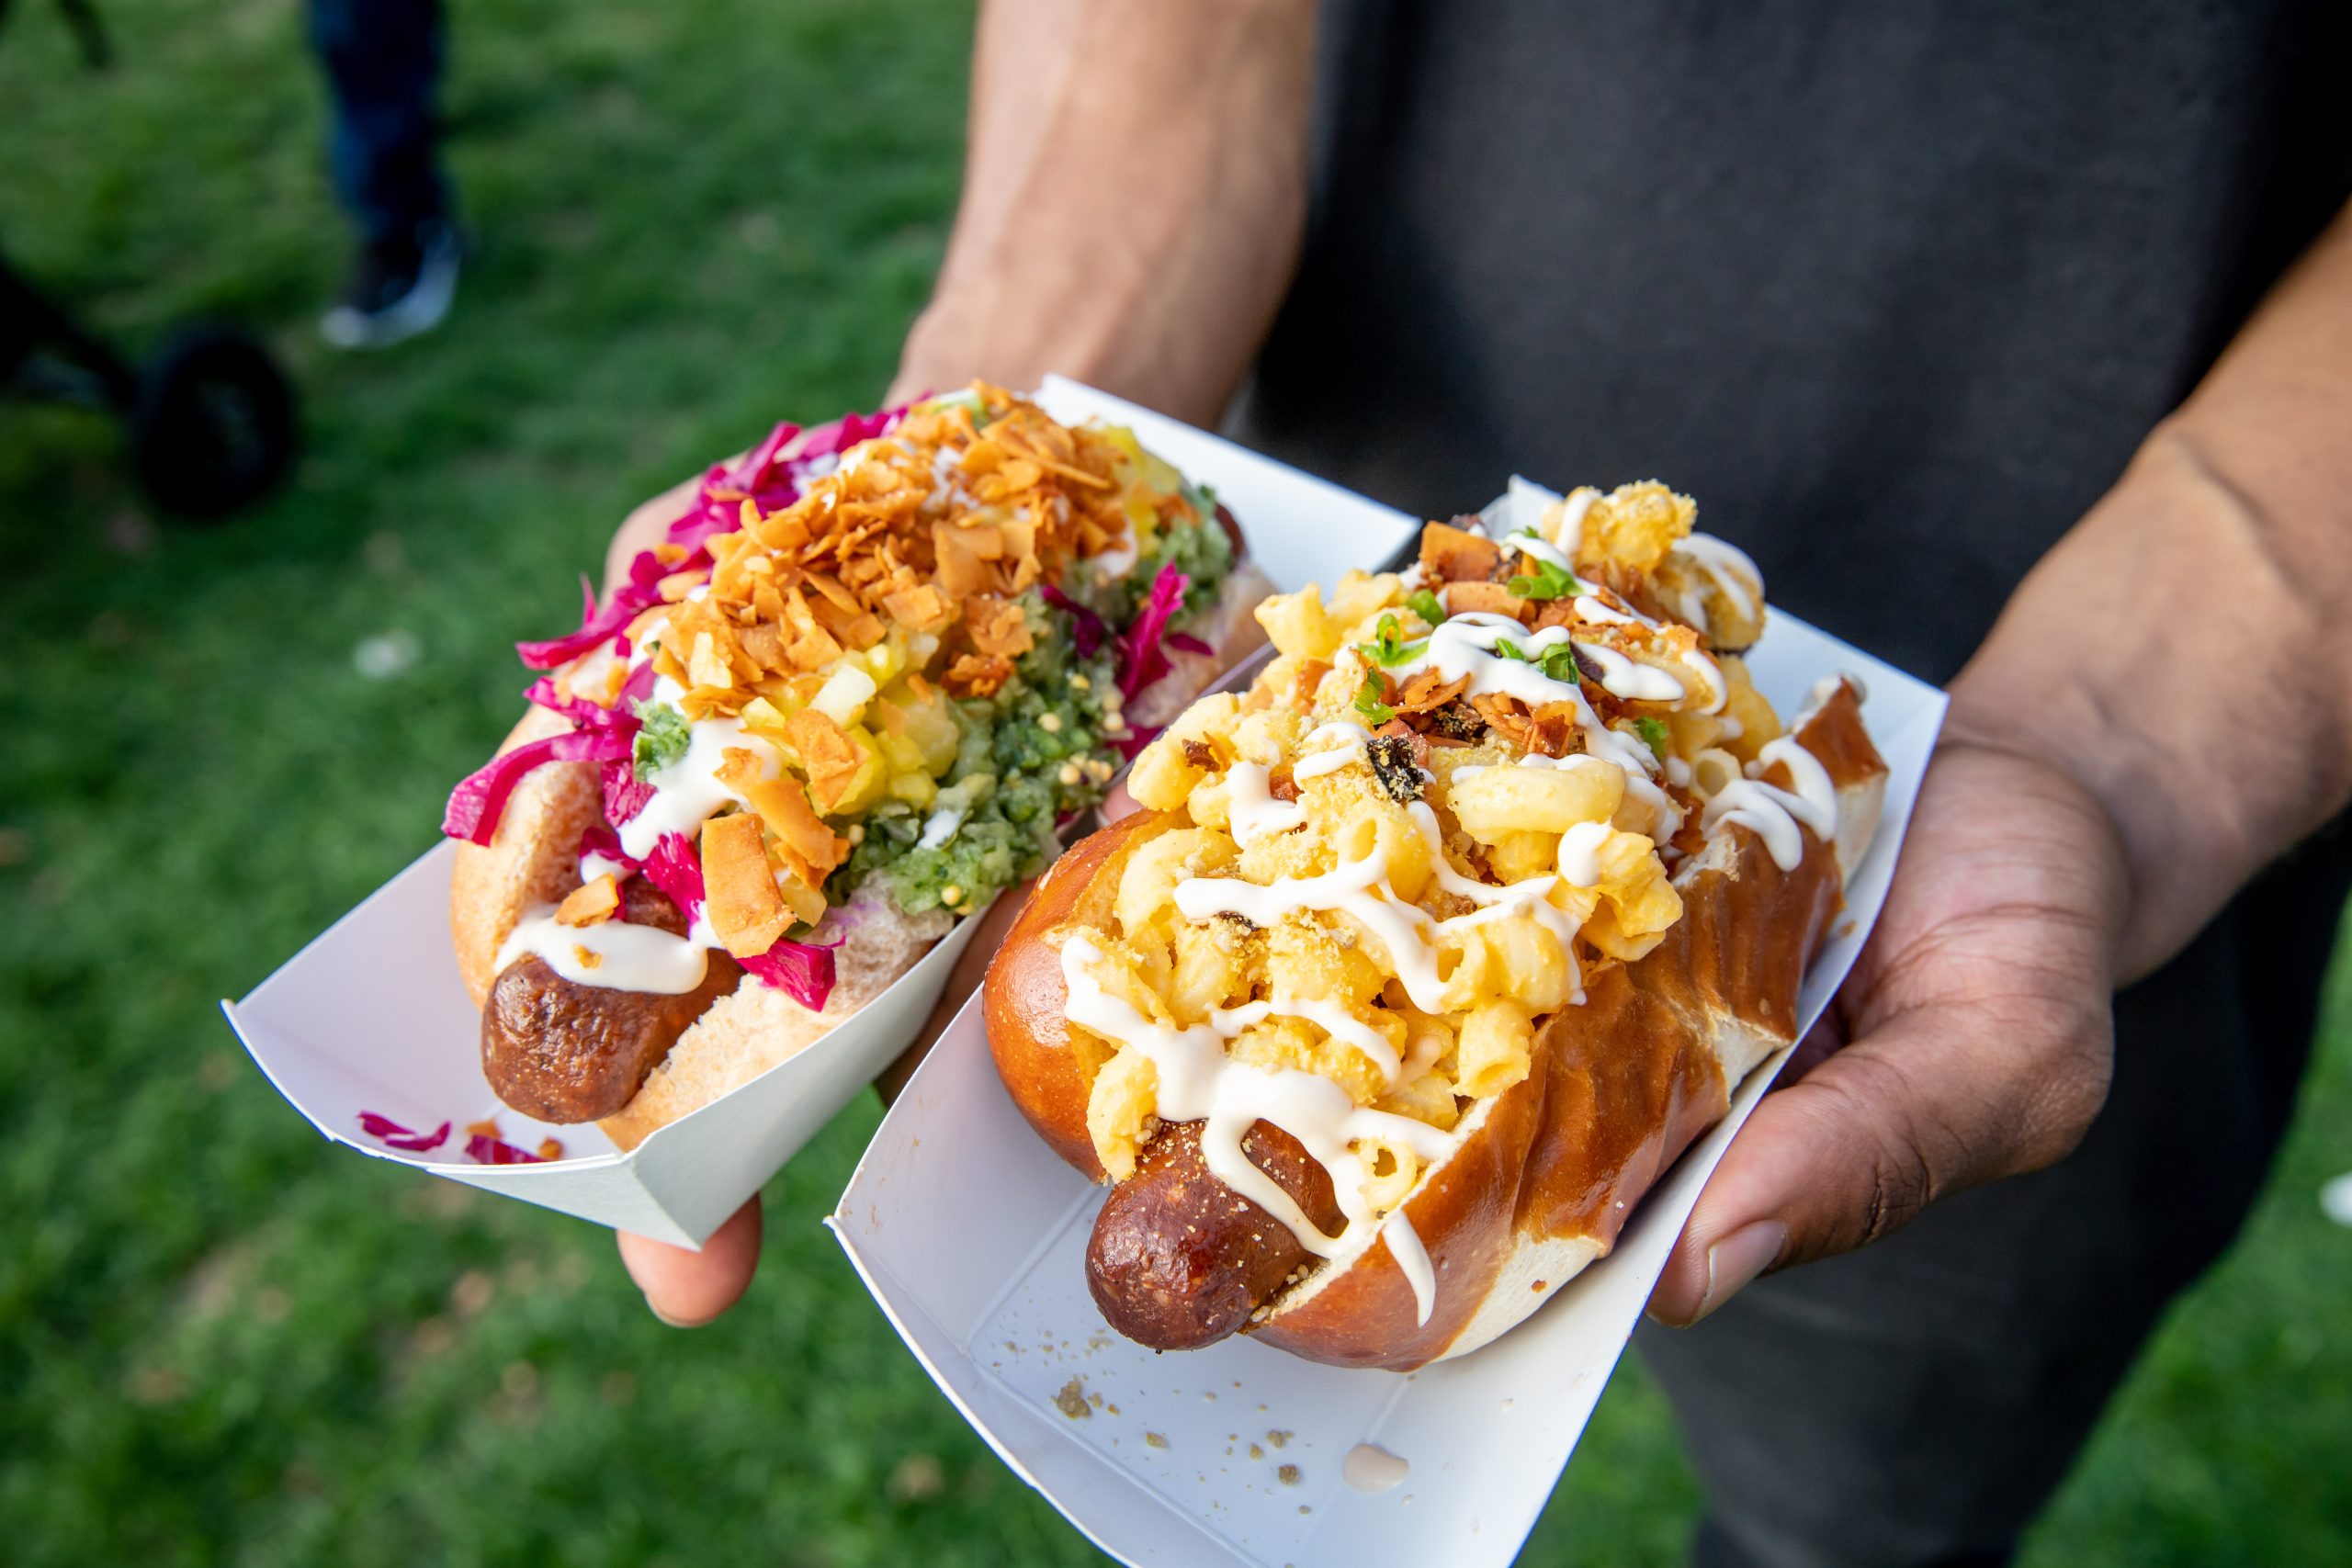 Person holding vegan hot dogs from Vegandale